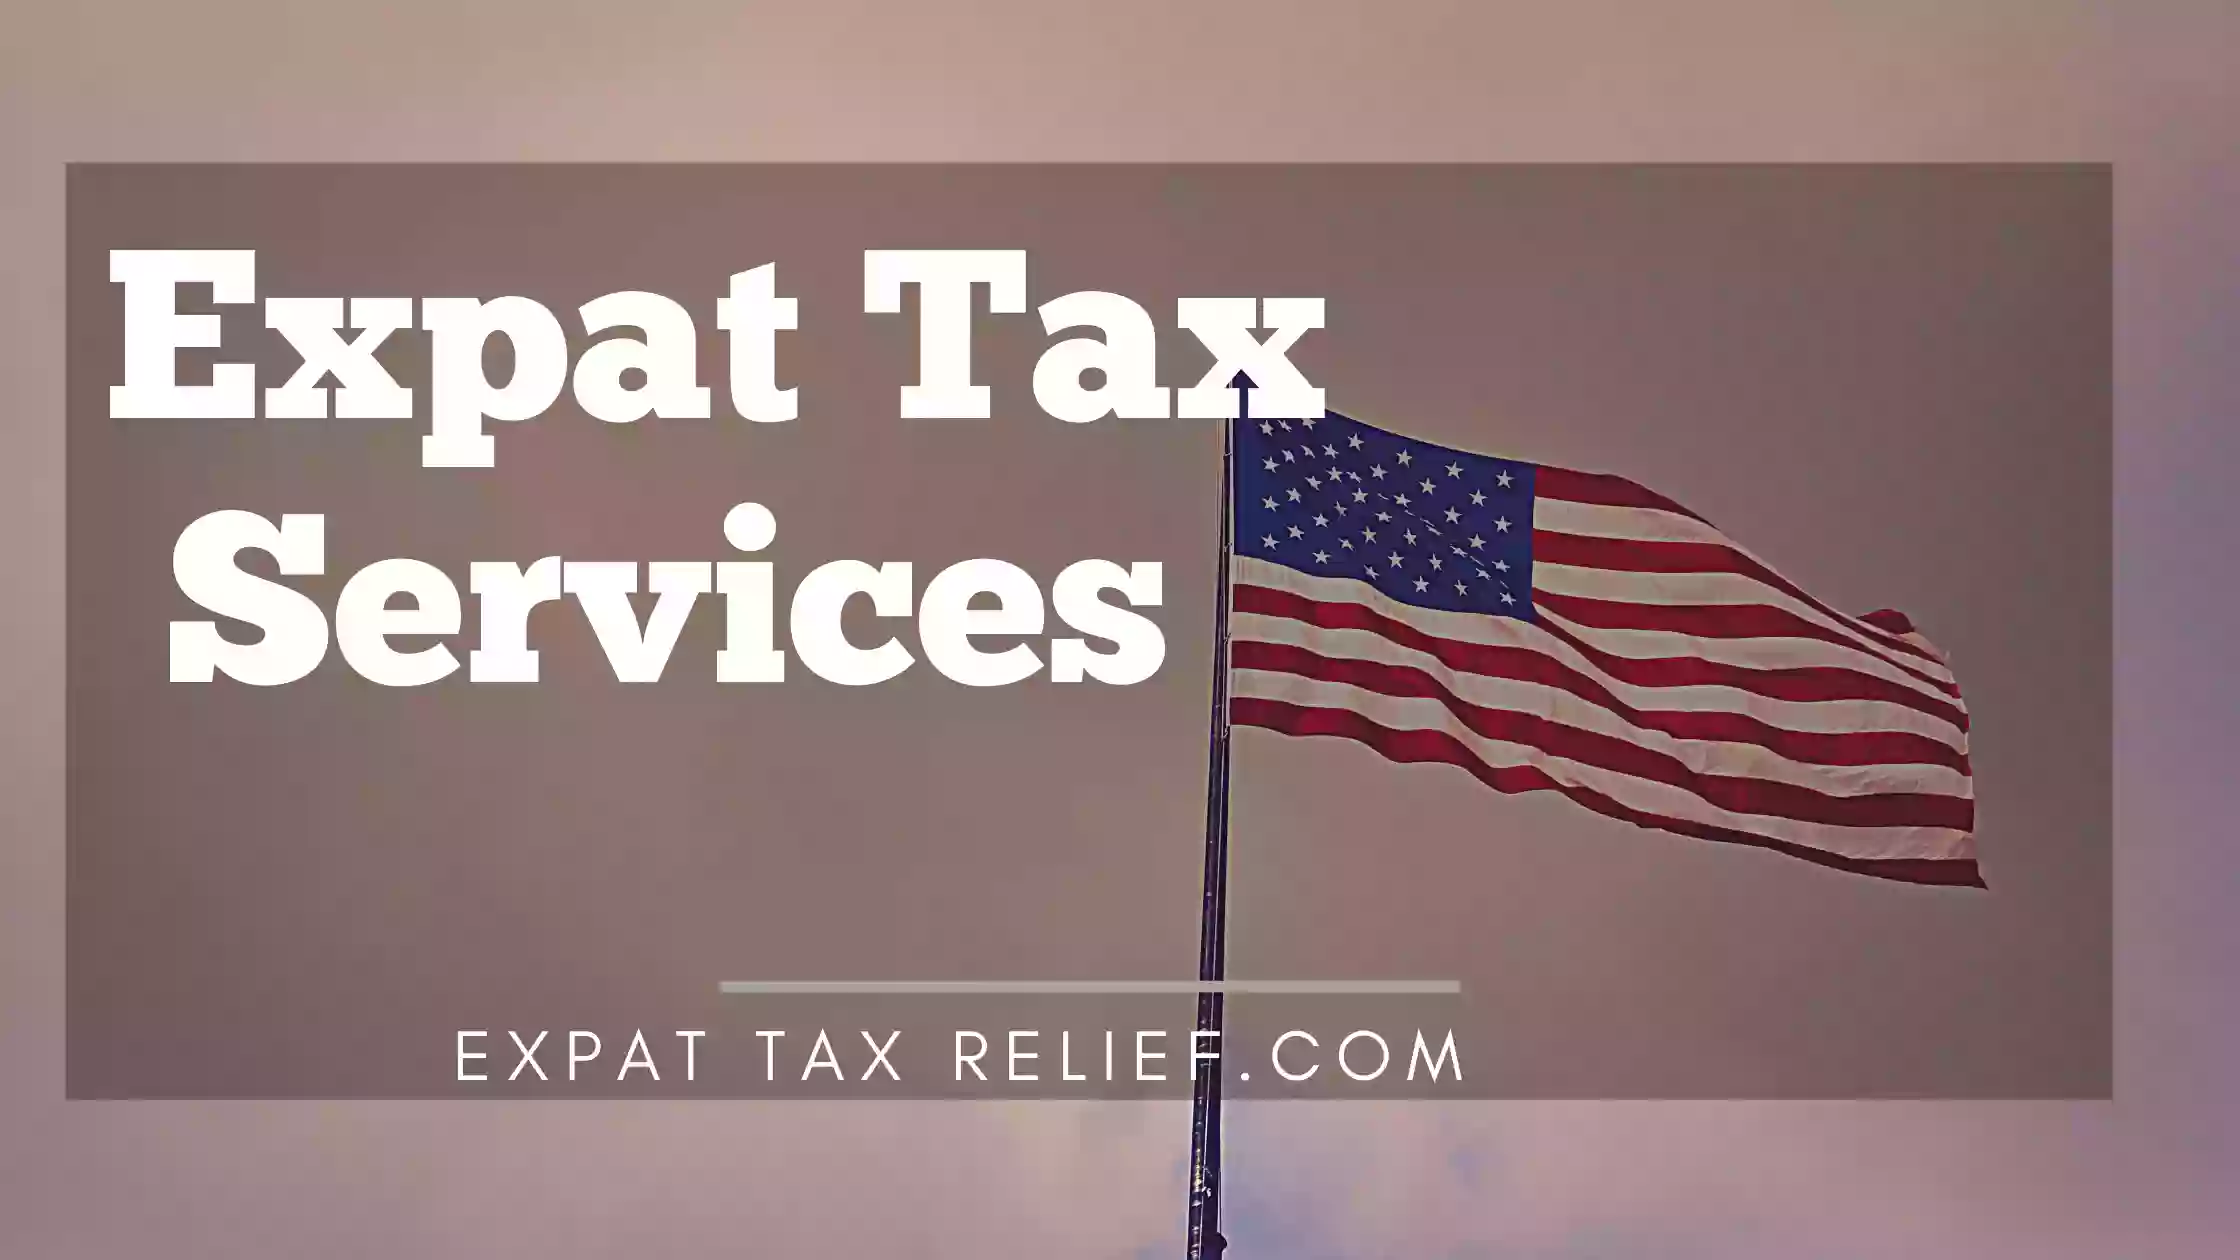 EXPAT TAX RELIEF